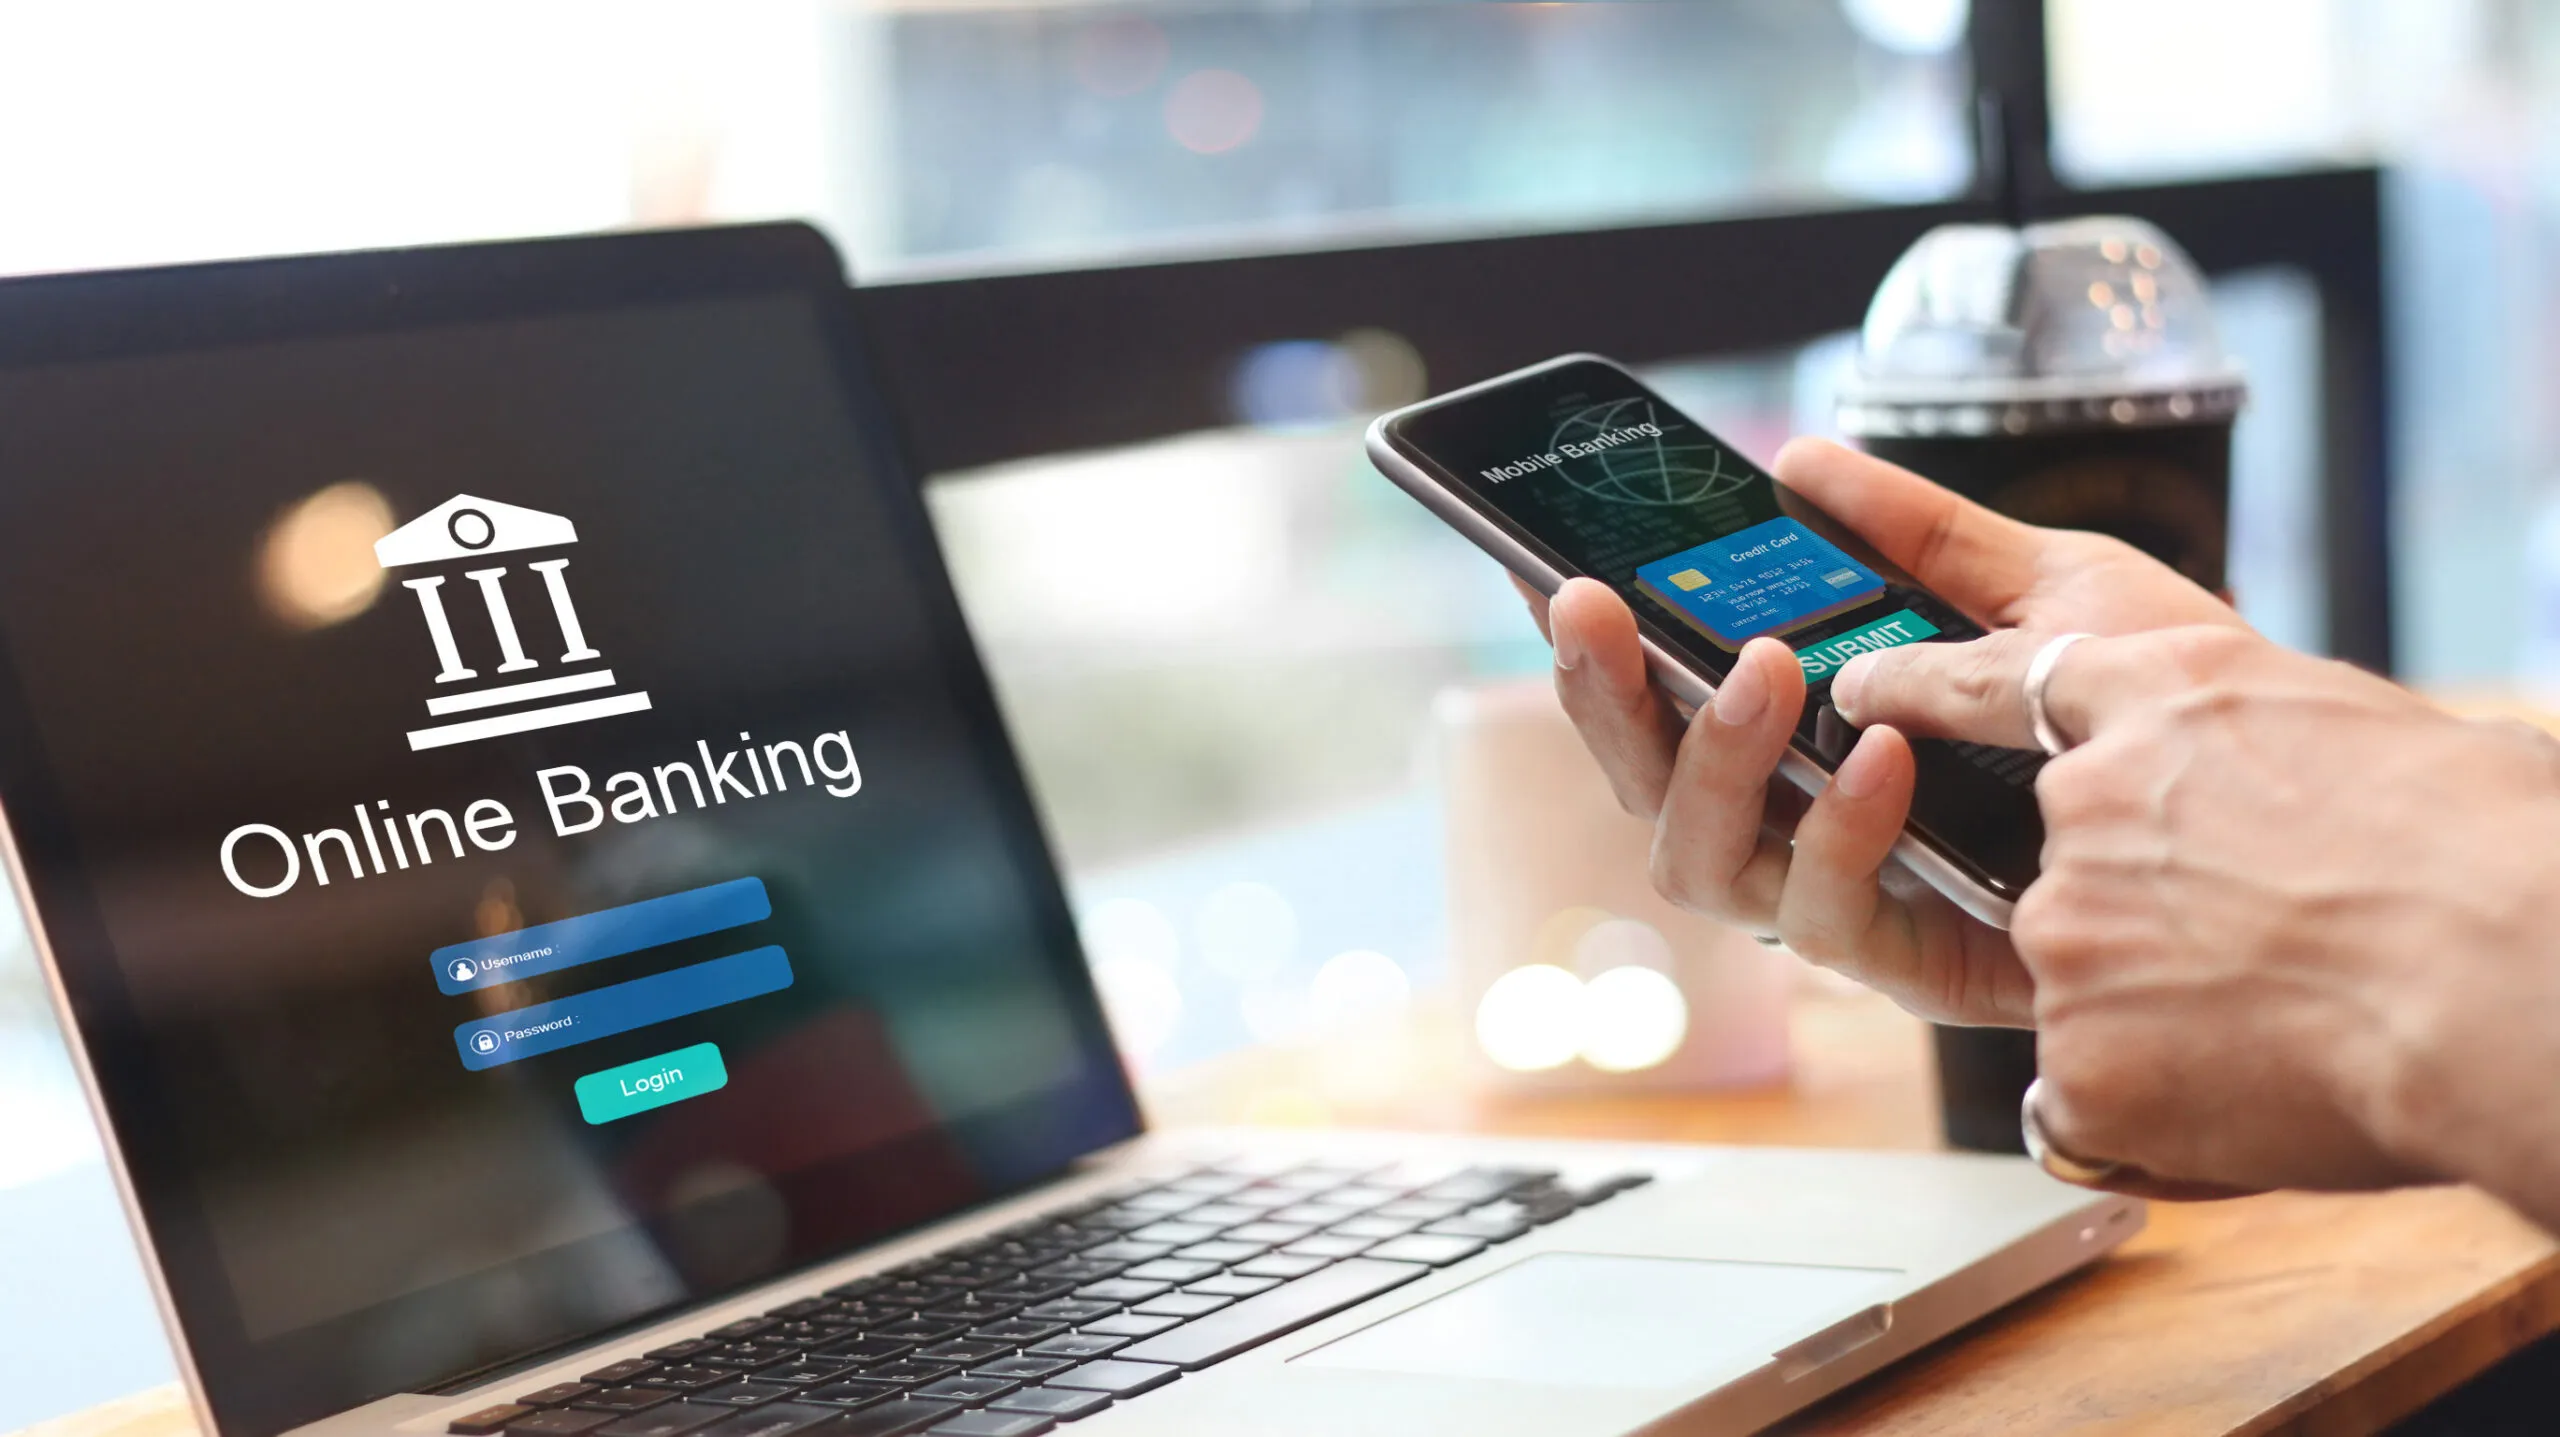 What Is Online Banking?